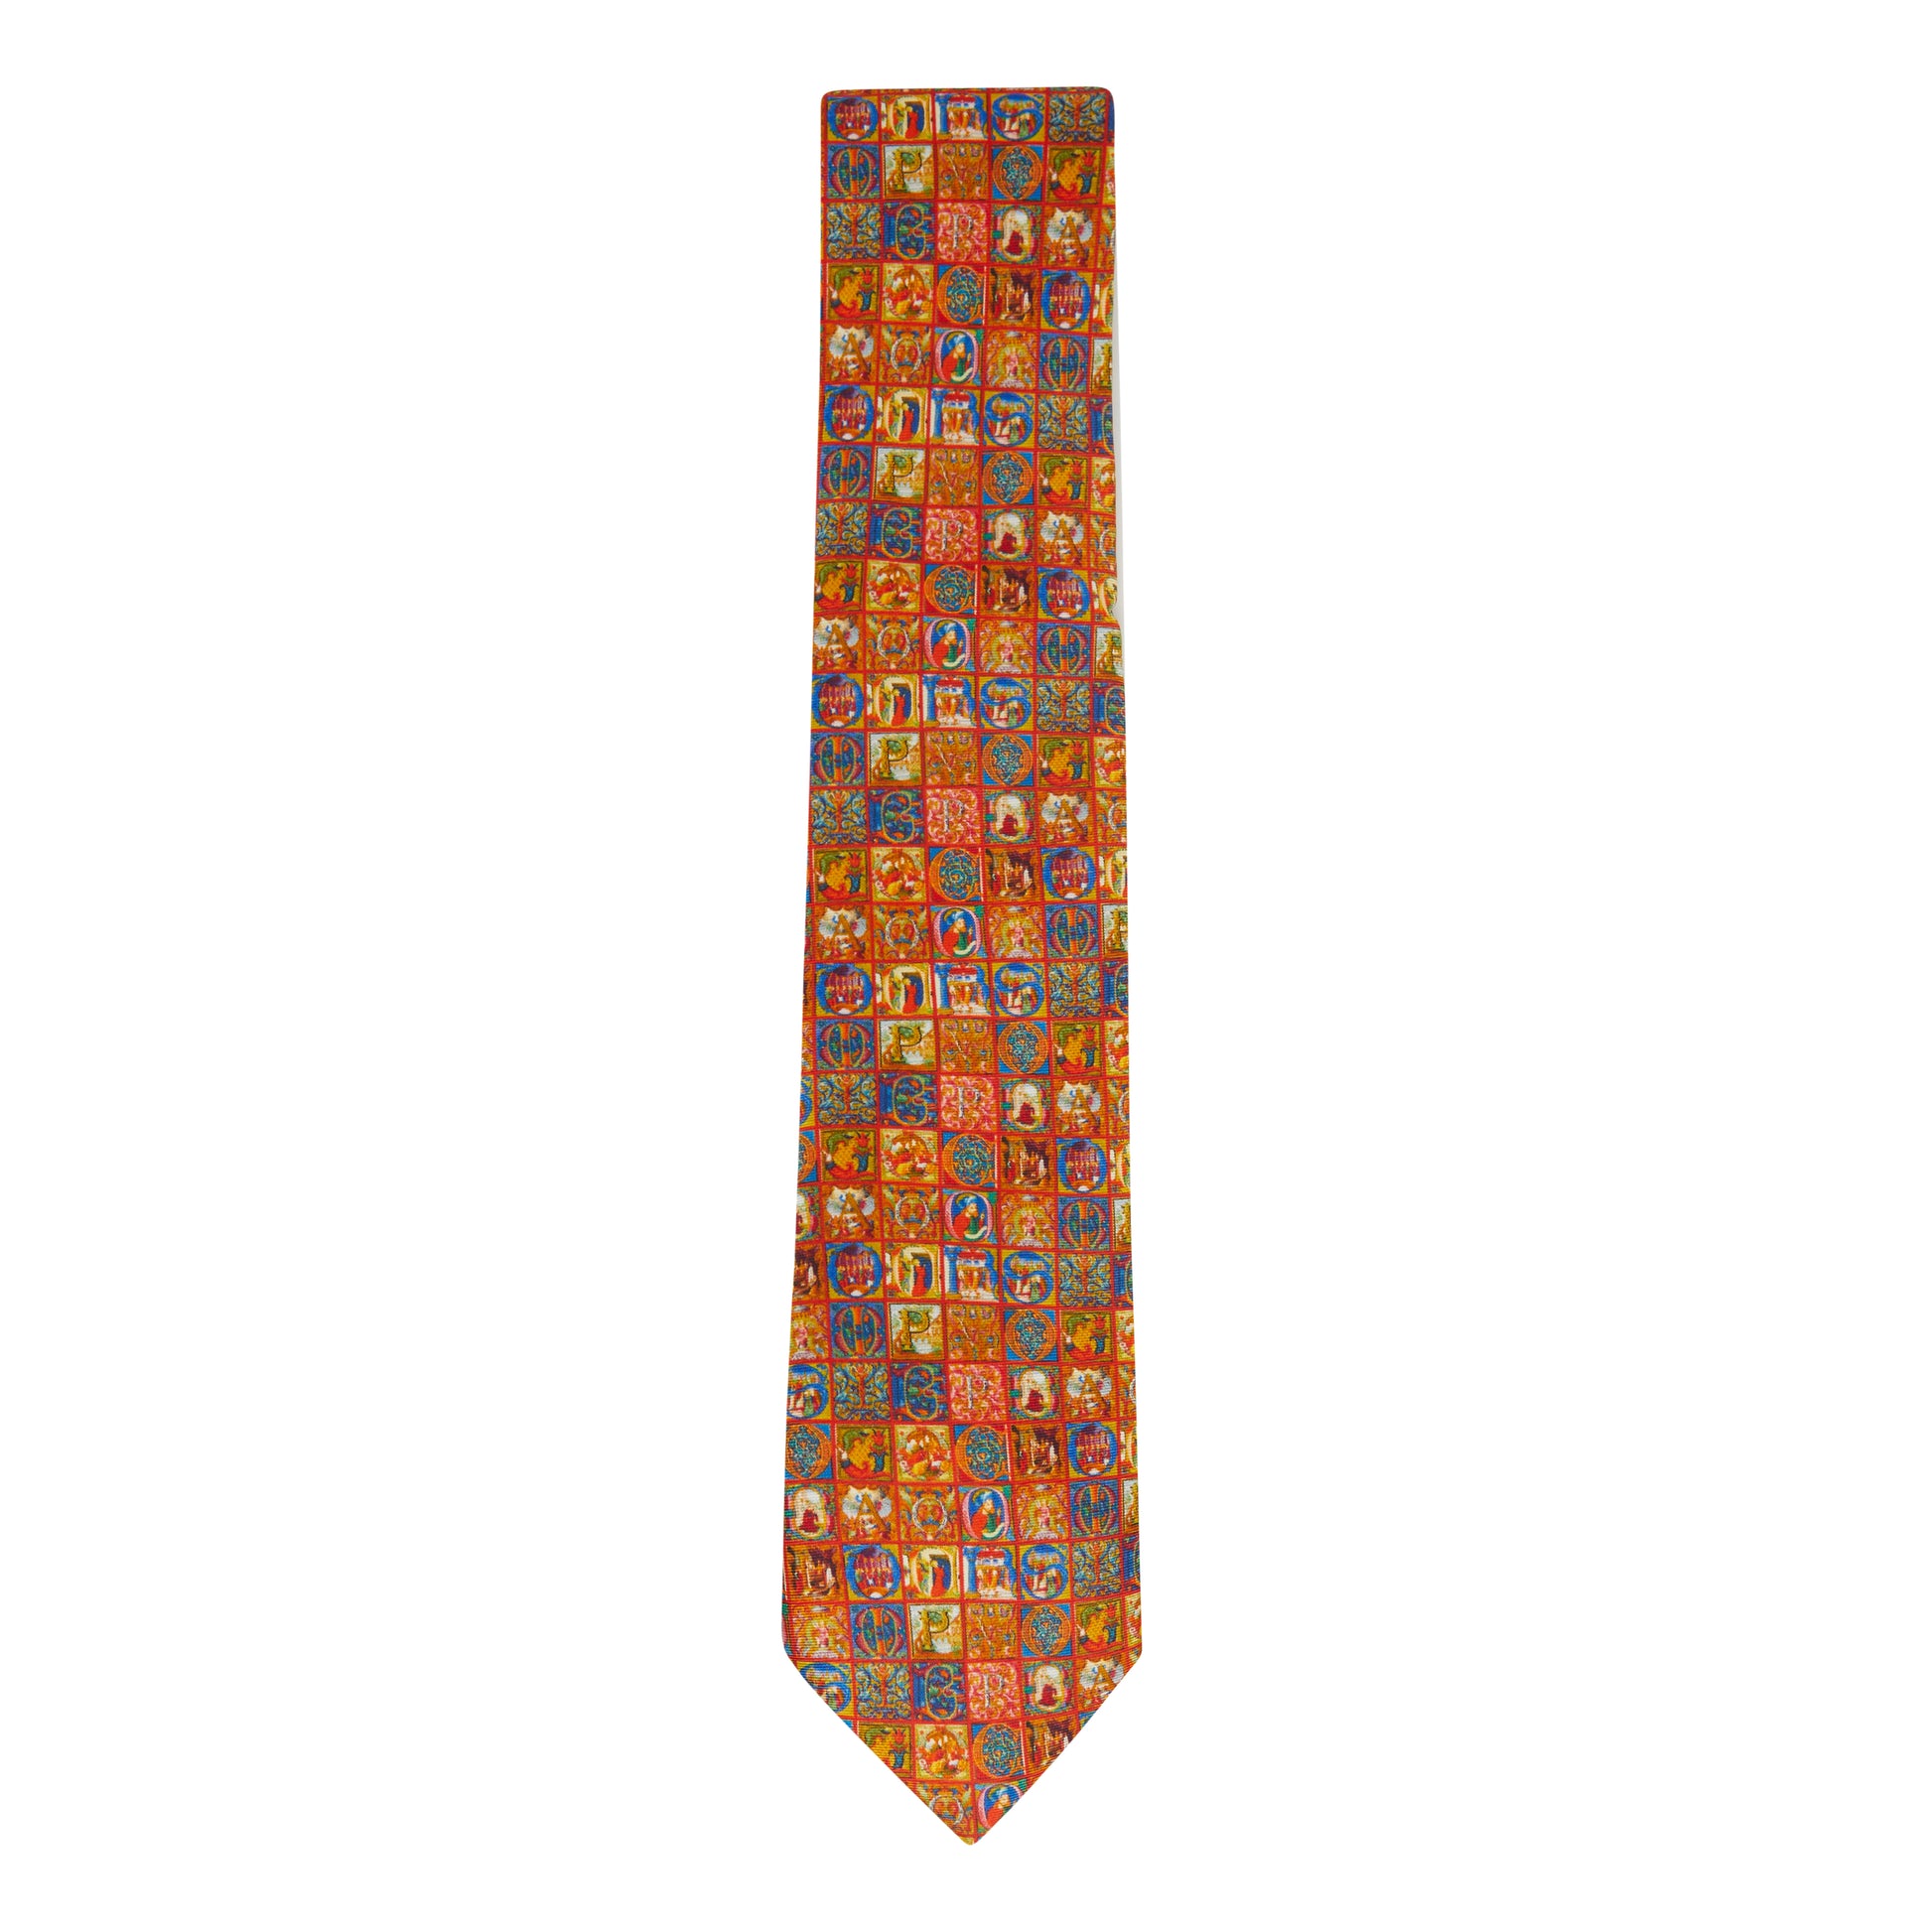 Red silk tie with illuminated letters in blue, red, gold and other colours. From the collection of the Fitzwilliam Museum.